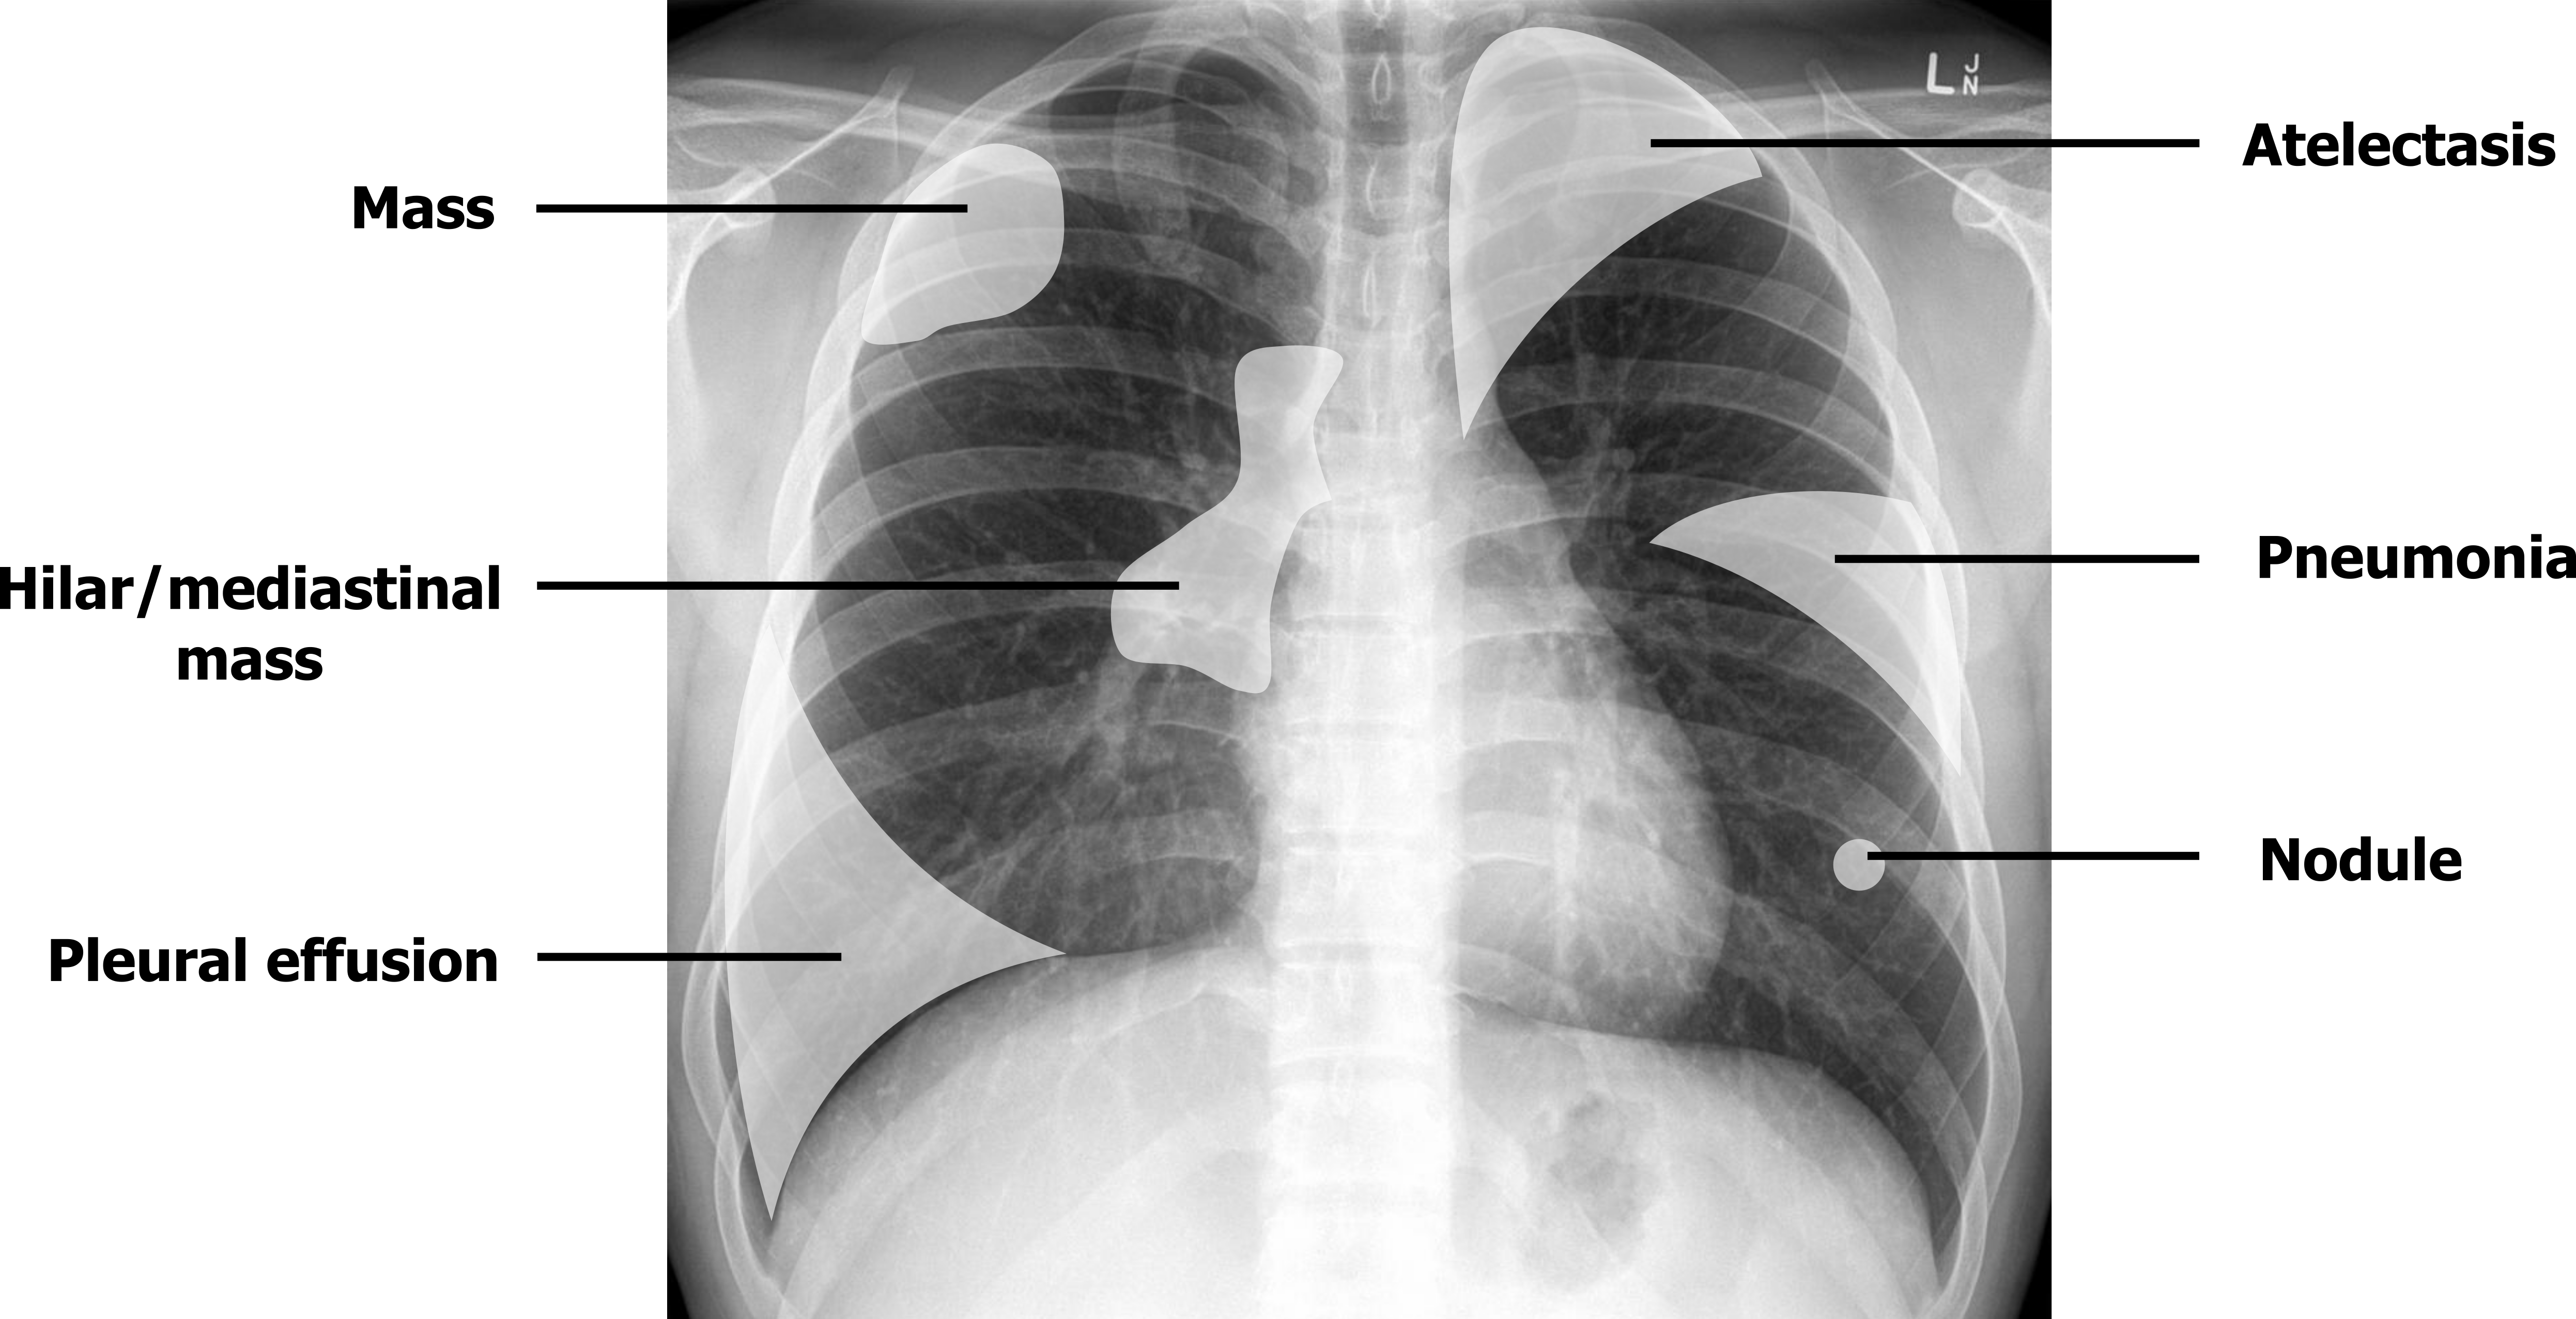 A normal A-P chest x-rays has opaque overlays showing potential sites of radiographic findings in lung. An overlay in the upper right lobe is labelled 'mass'. An overlay in the upper left lung is labelled 'atelectasis'. An overlay in the central region of the lung is labelled 'hilar/mediastinal mass'. An overlay in the middle left lobe is marked 'pneumonia'. An overlay in the right basilar region is labelled 'pleural effusion. A Small circular overlay in the left lower lobe is labelled 'nodule'.